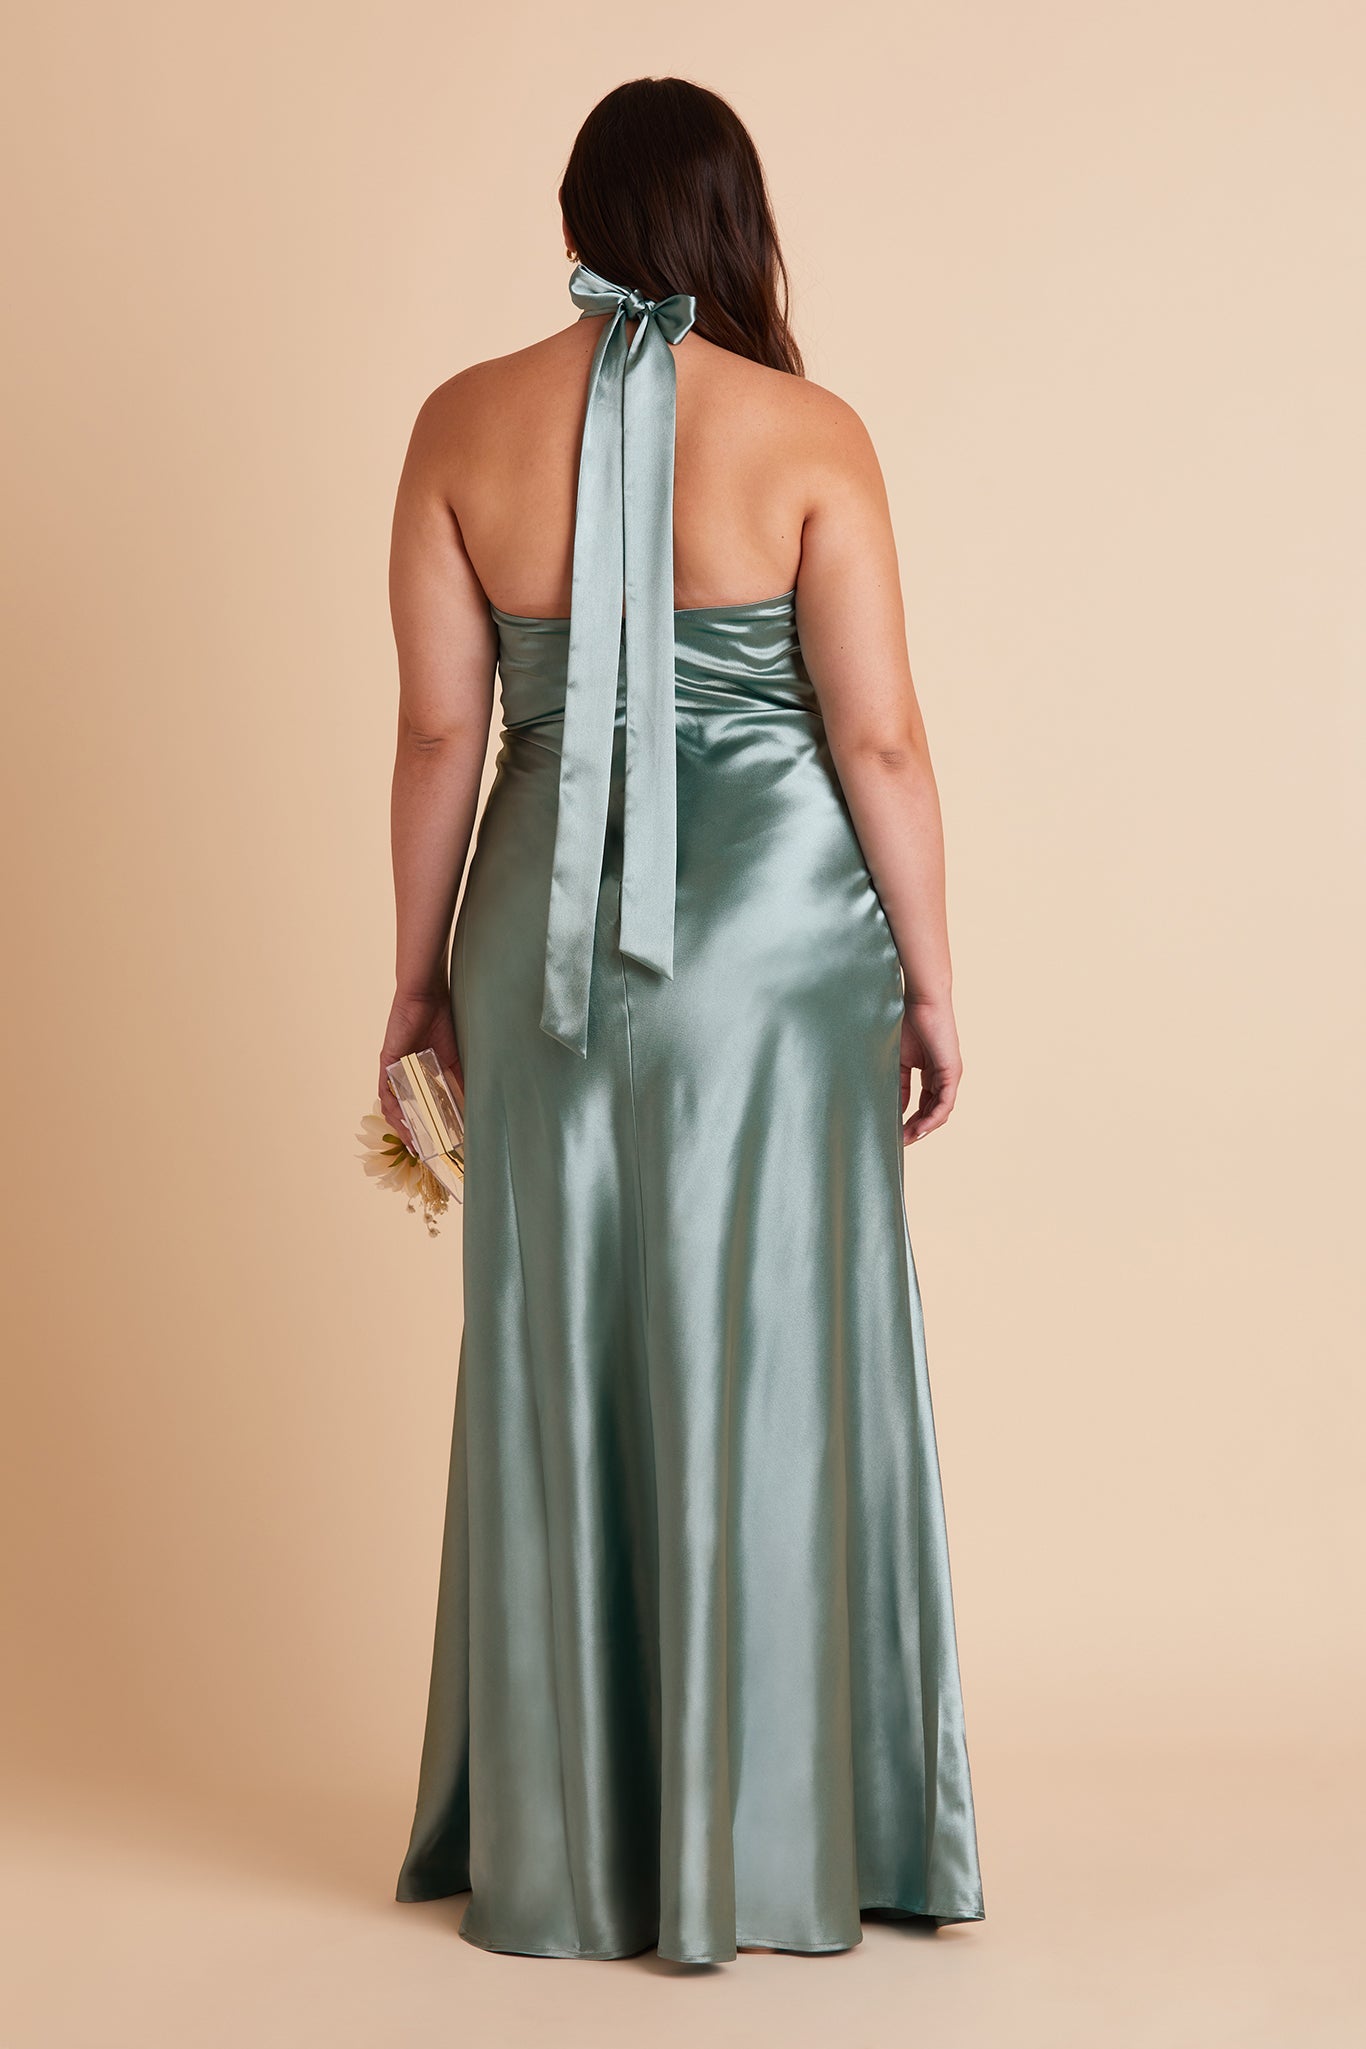 Monica plus size bridesmaid dress with slit in sea glass satin by Birdy Grey, back view